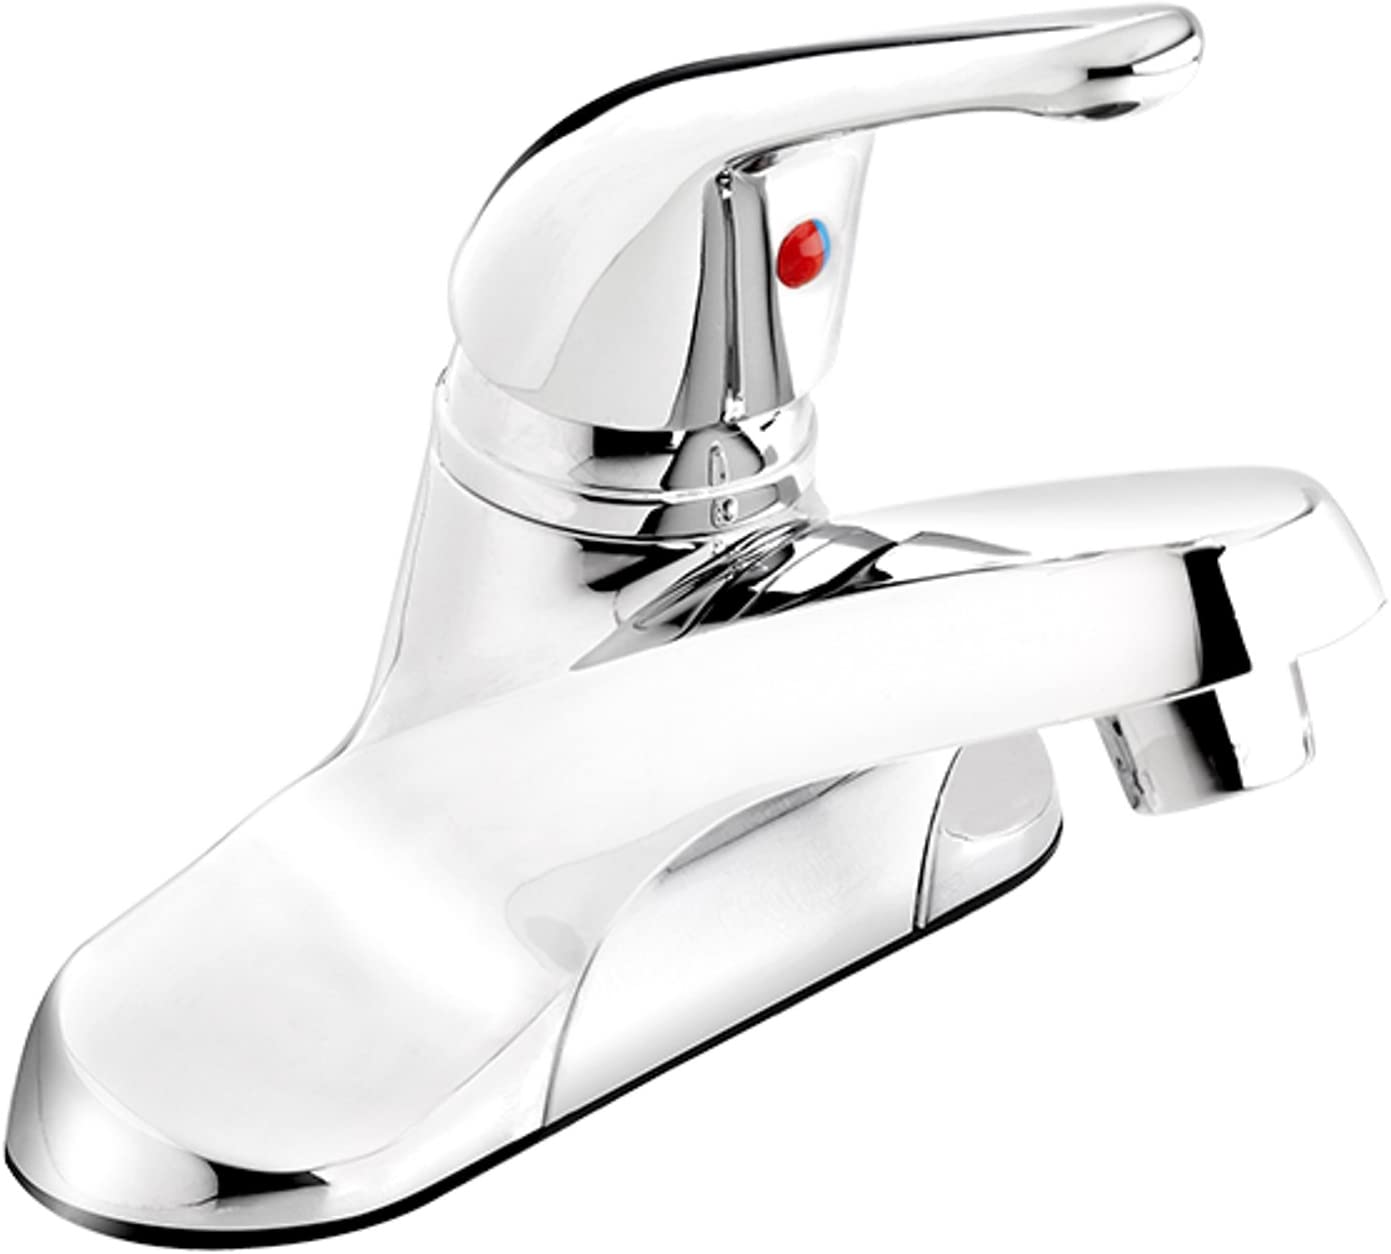 7.48 X 9.45 X 5.12 In. Bathroom Sink Faucet With 1 Handle & 4 In. Centerset, Polished Chrome